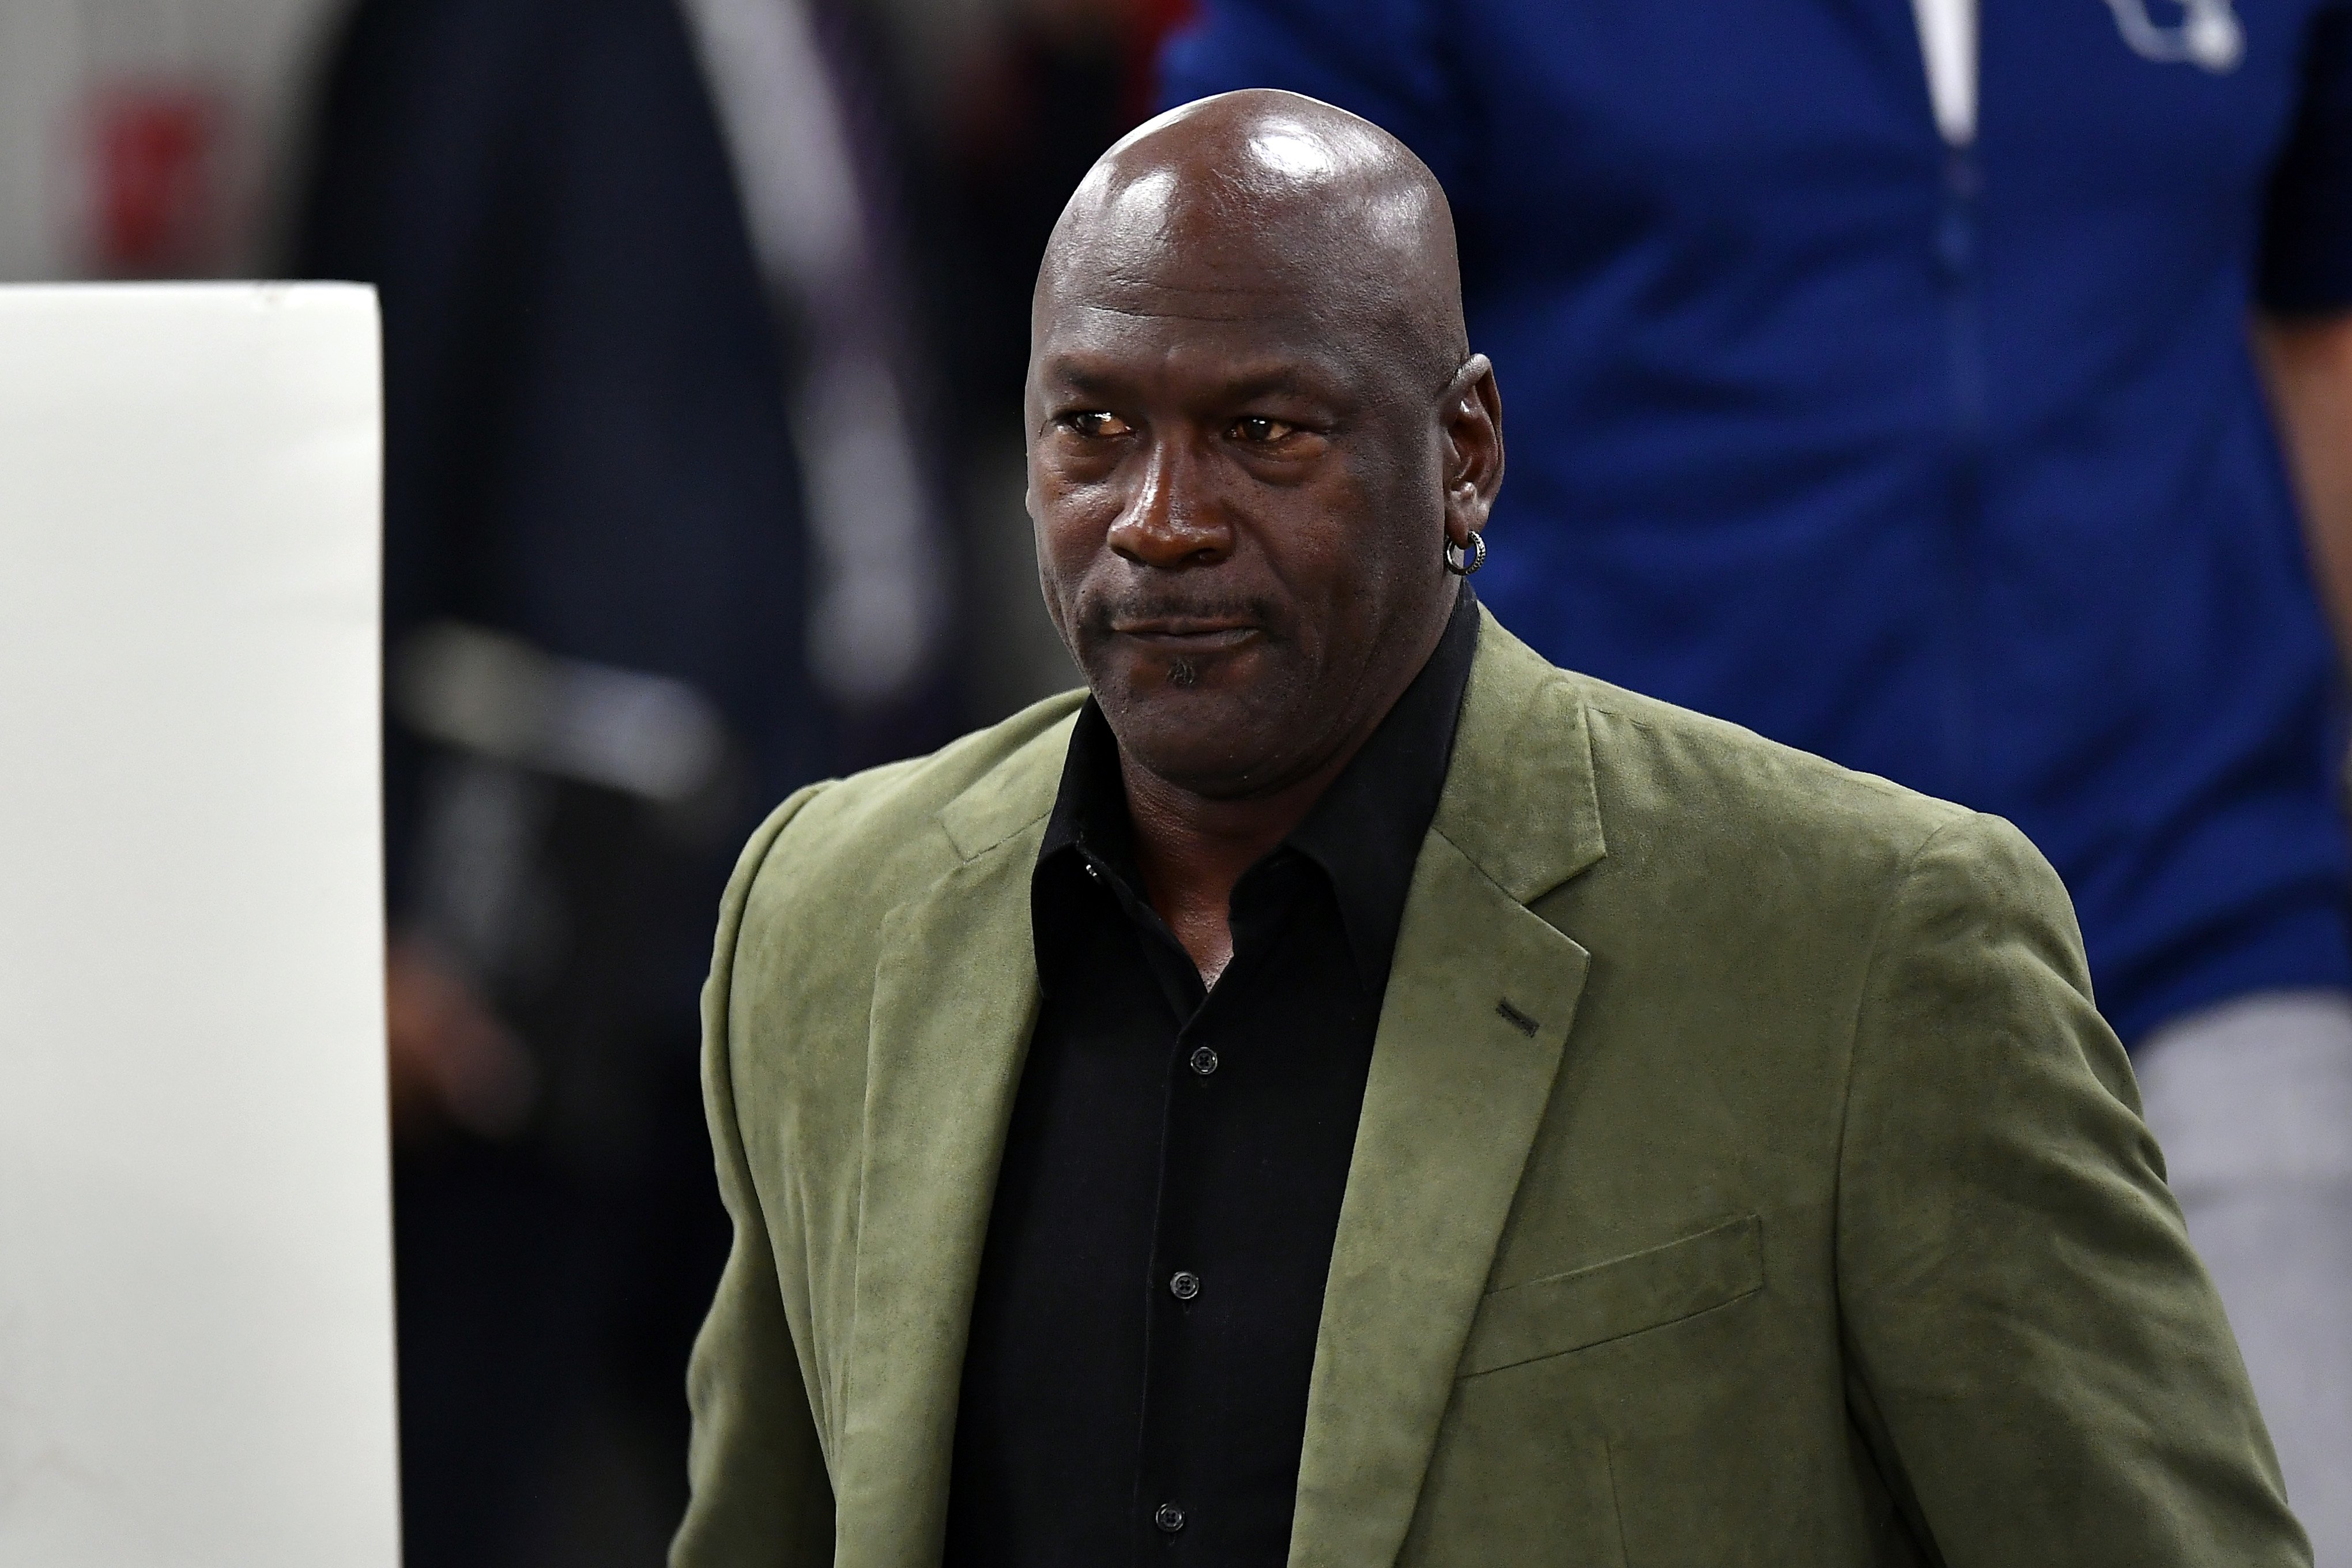 Michael Jordan attends a press conference before the NBA Paris Game match between Charlotte Hornets and Milwaukee Bucks on January 24, 2020. | Photo: Getty Images